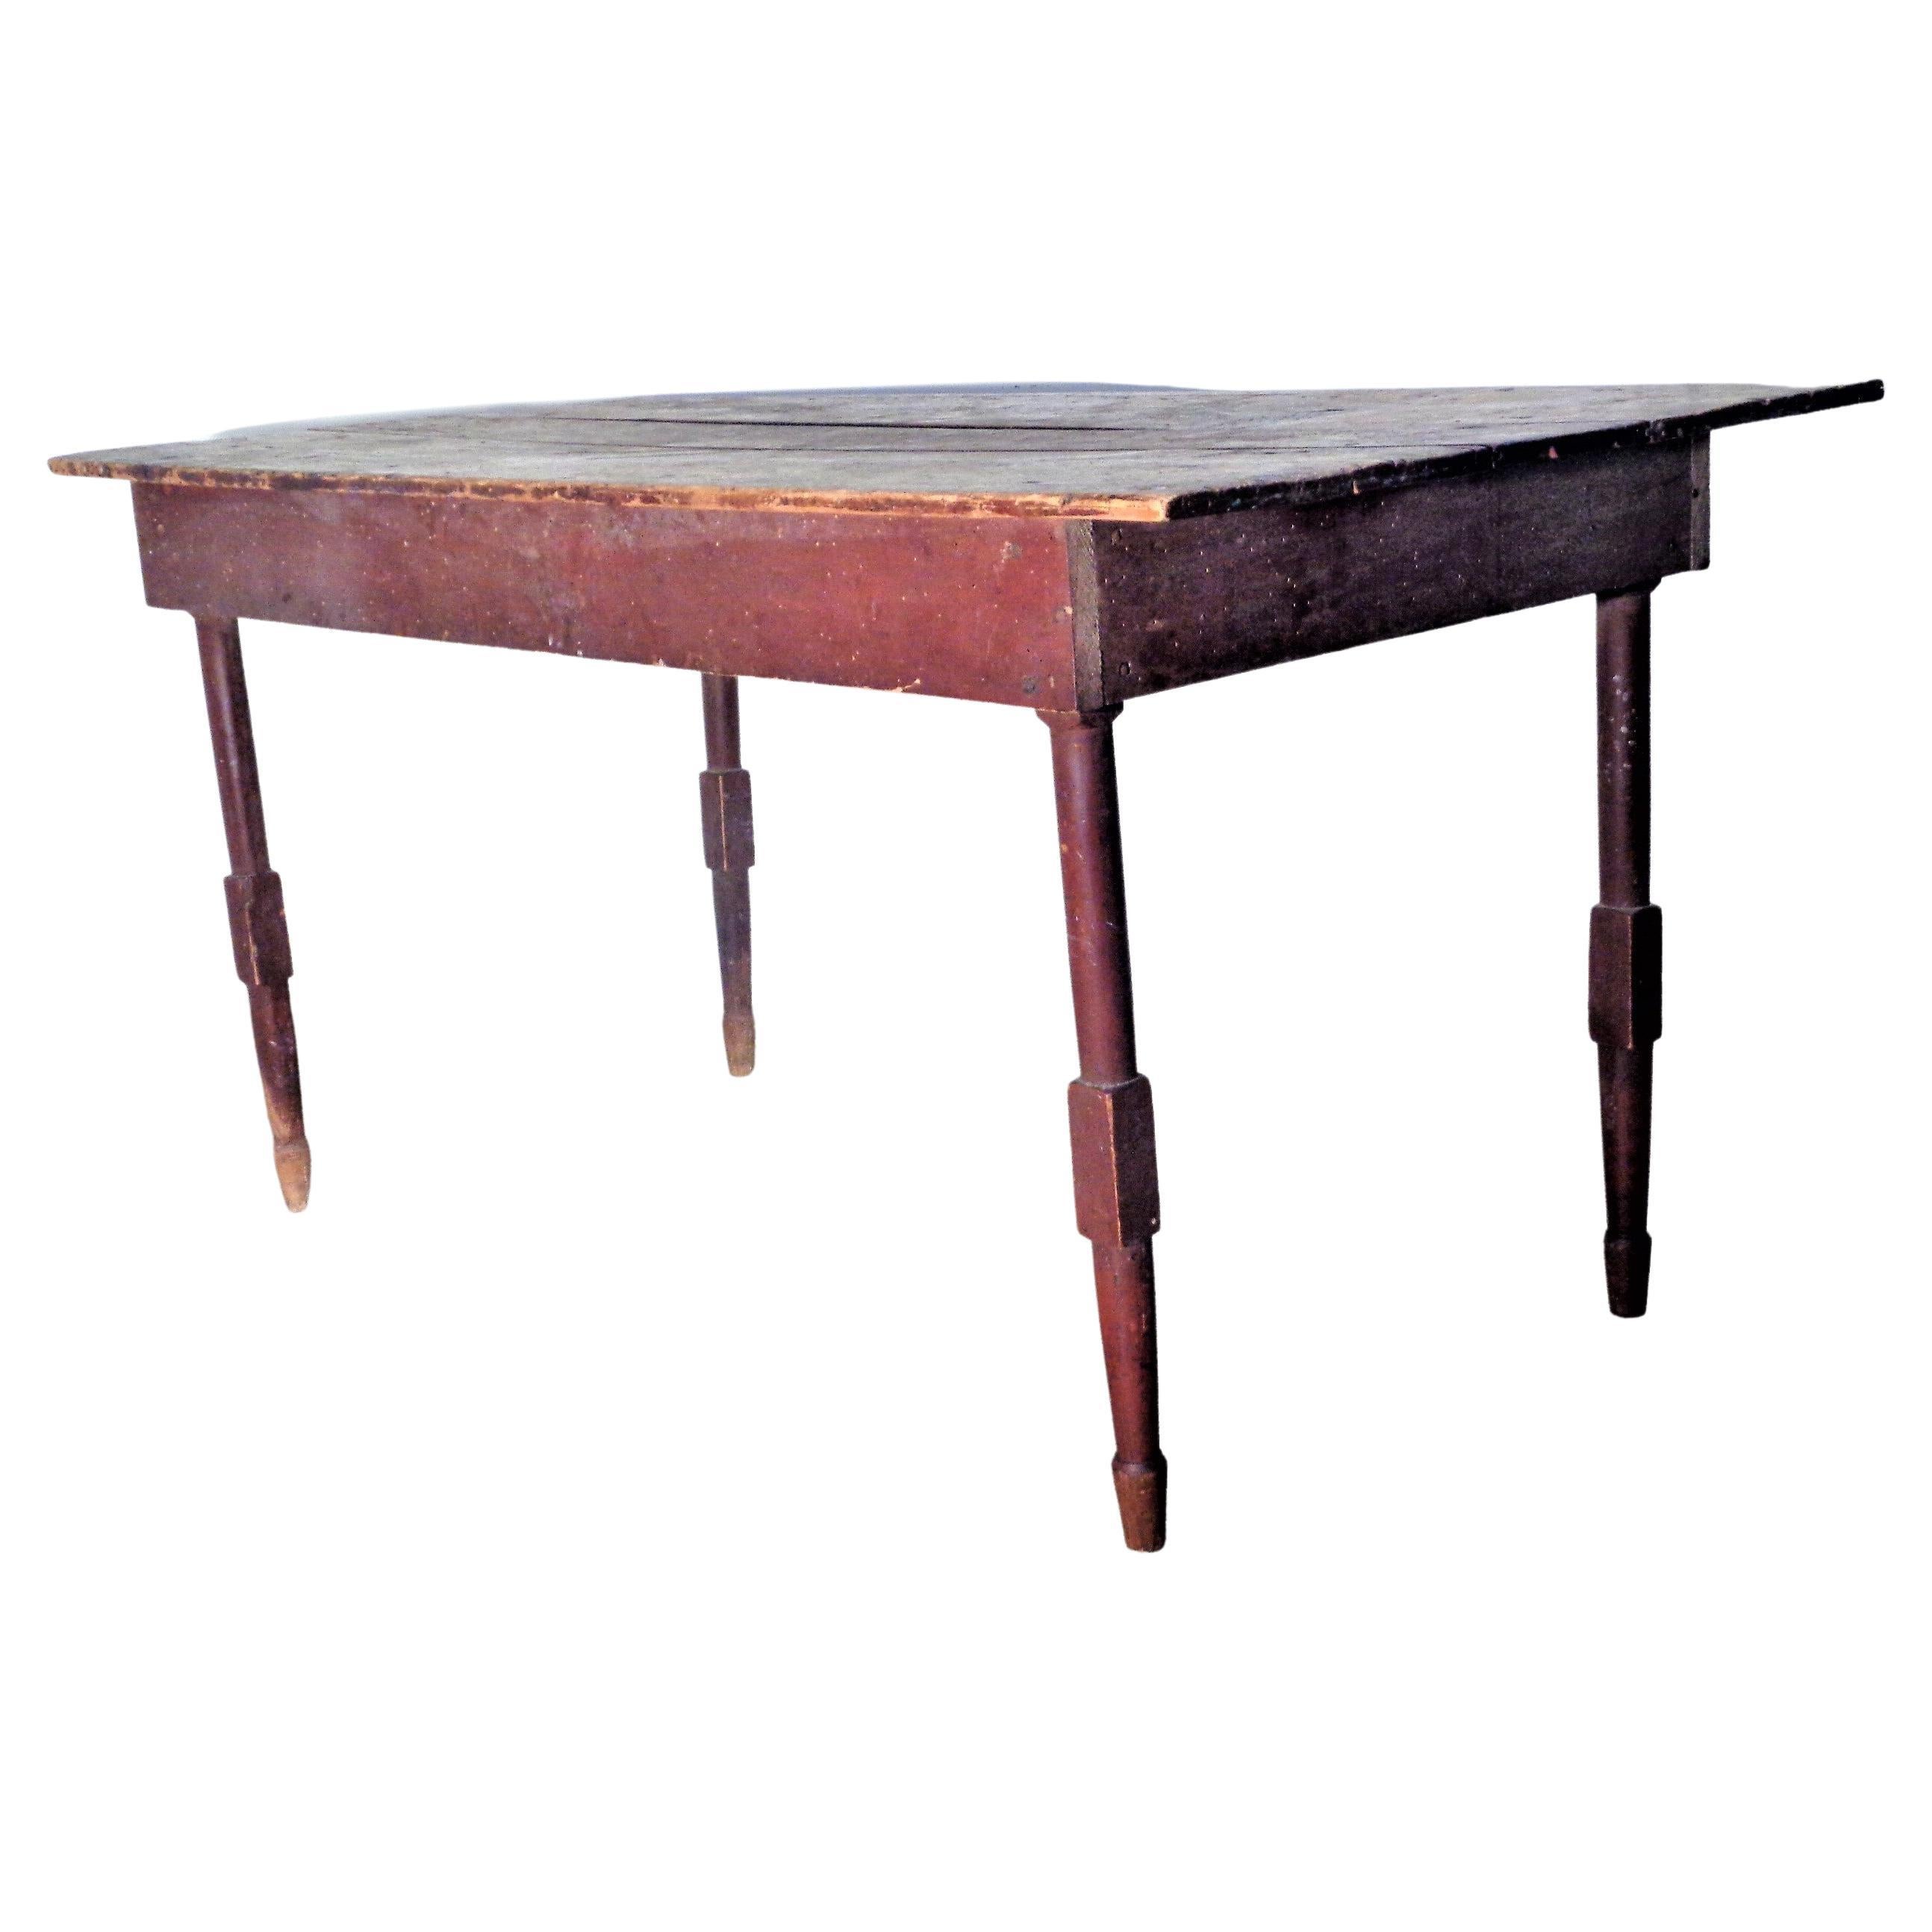 Hand-Crafted Antique American Farm Table, circa 1850-1860 For Sale